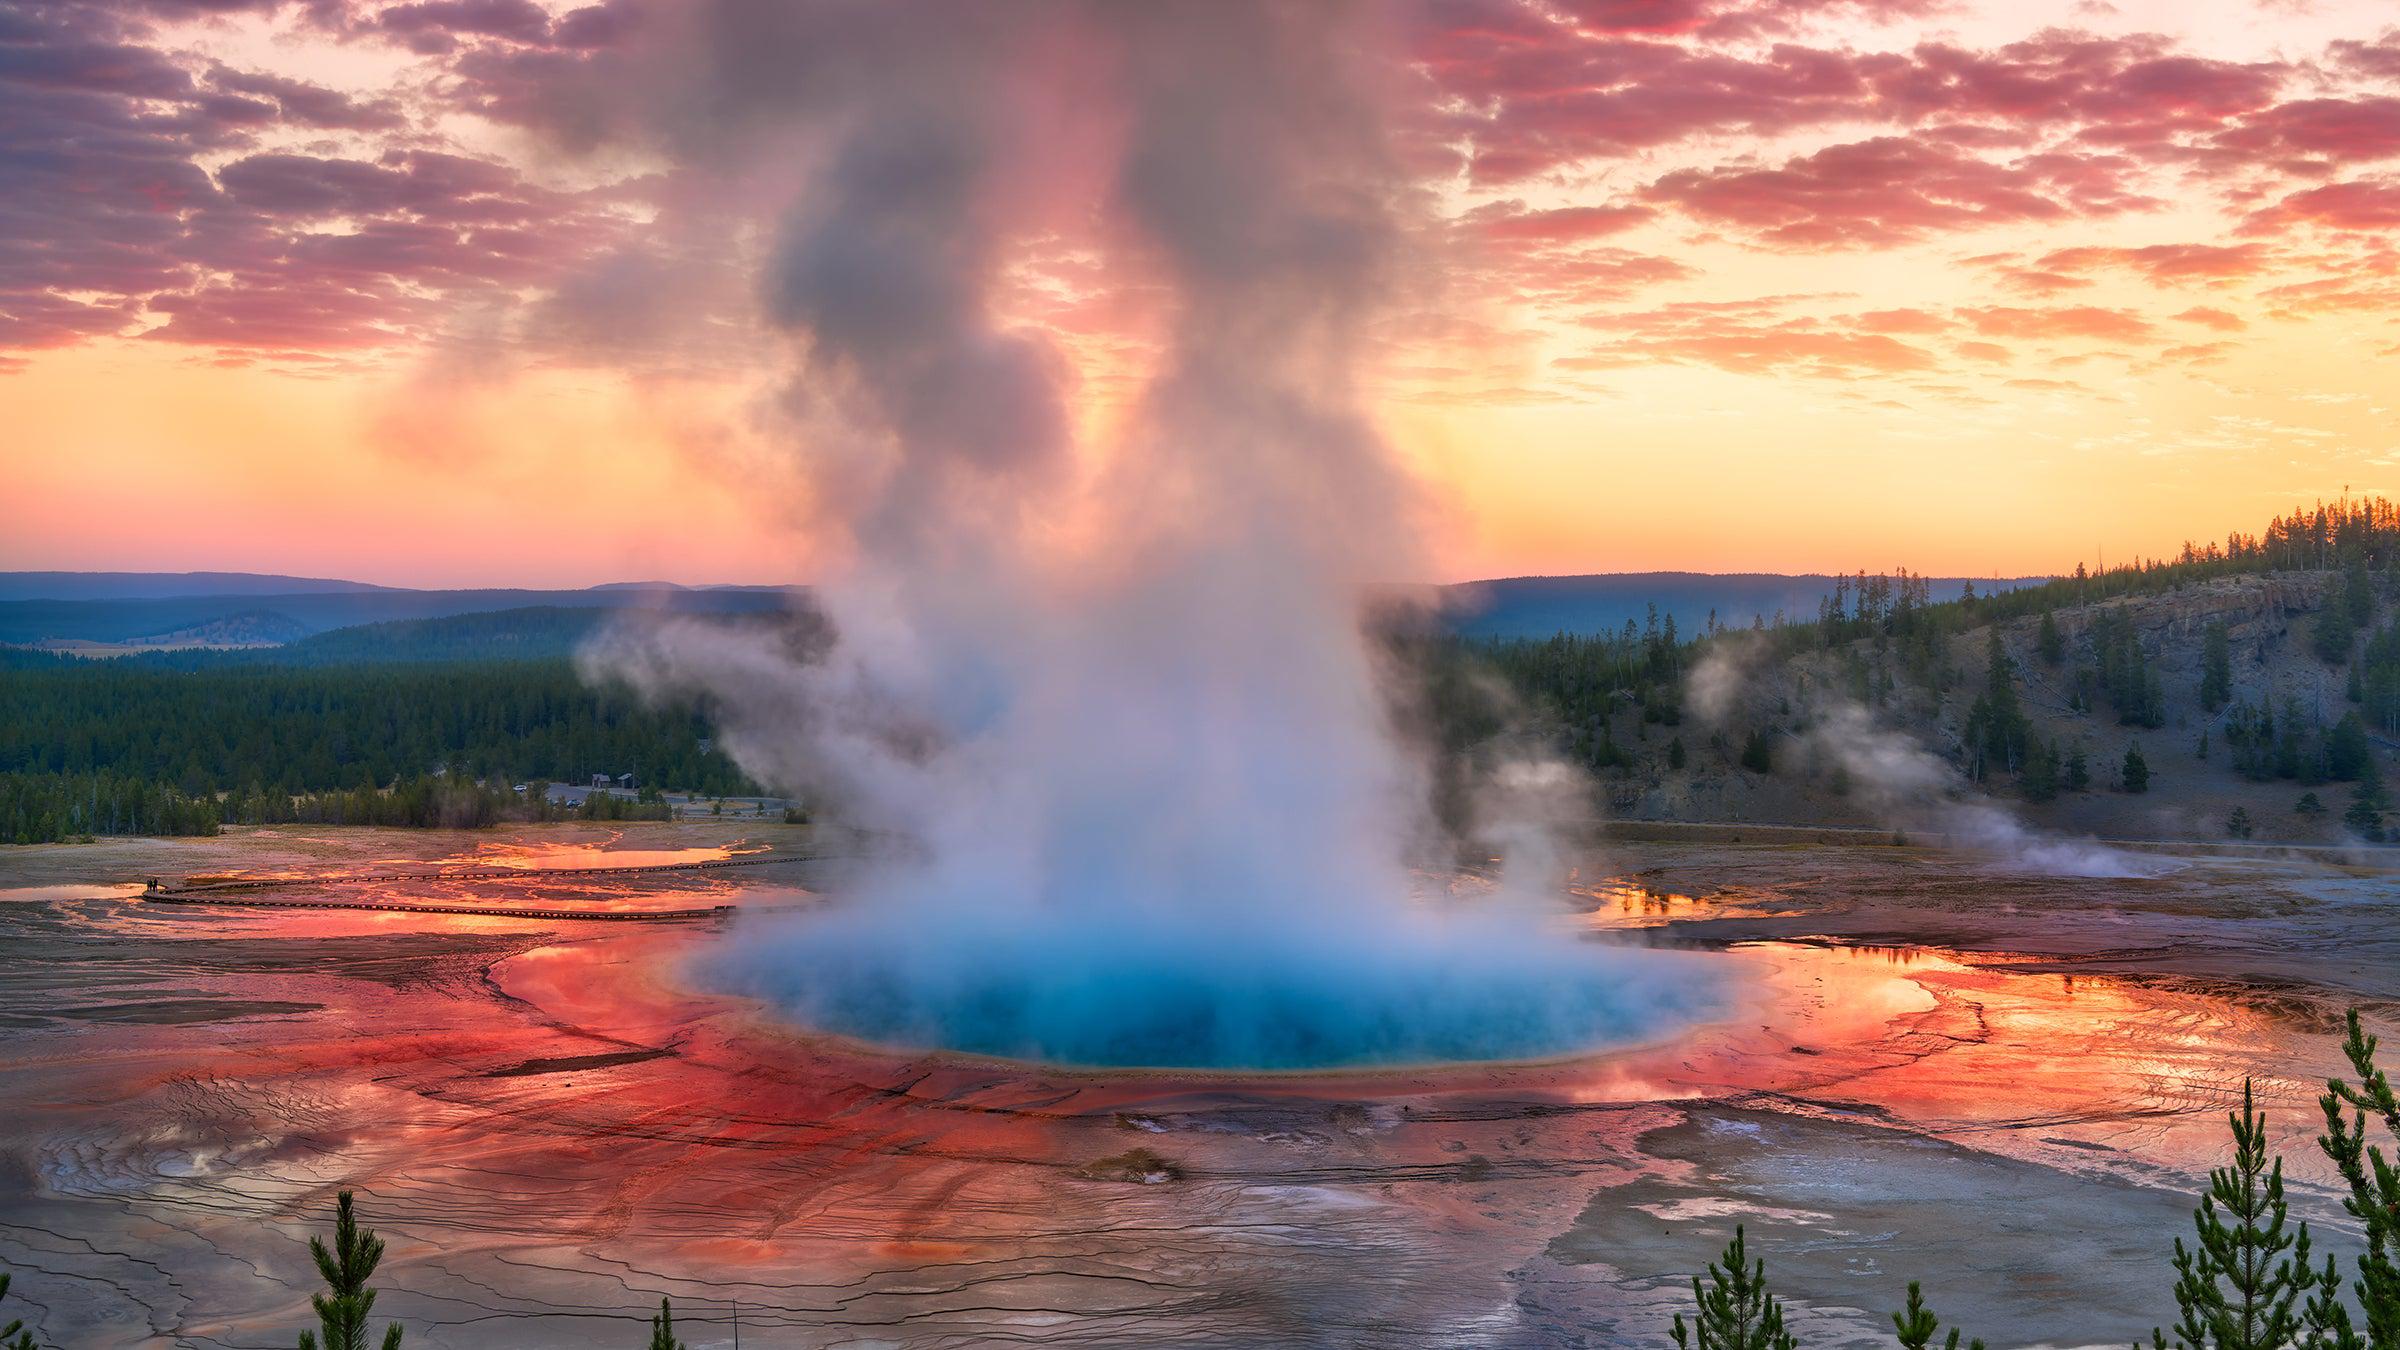 Yellowstone Ground Tour - 7 Days with Amtrak from Emeryville